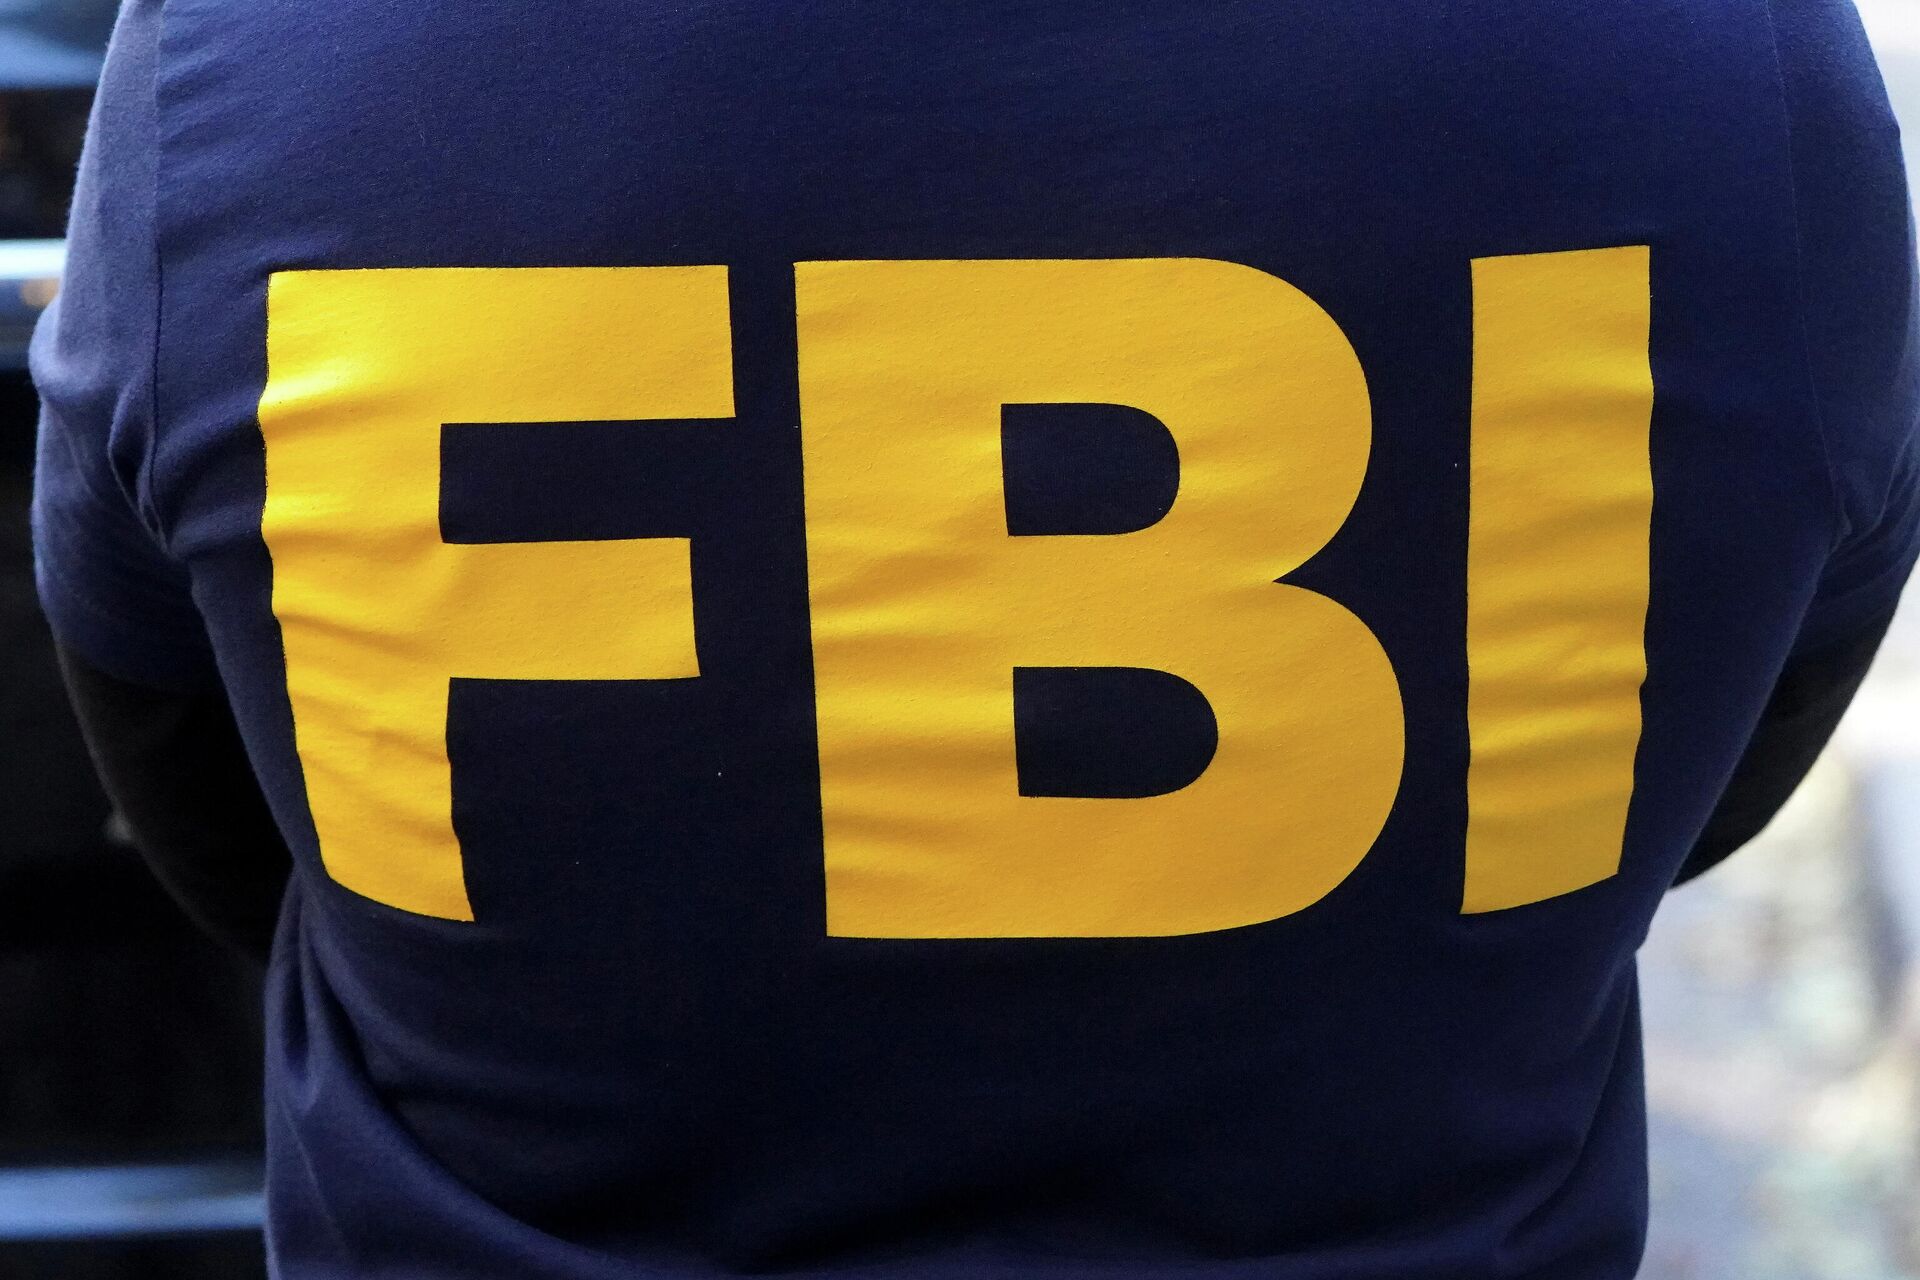 An FBI logo is pictured on an agent's shirt during the U.S. law enforcements raid on Russian oligarch Oleg Deripaska's property in the Manhattan borough of New York City, New York, U.S. October 19, 2021 - Sputnik International, 1920, 19.11.2021